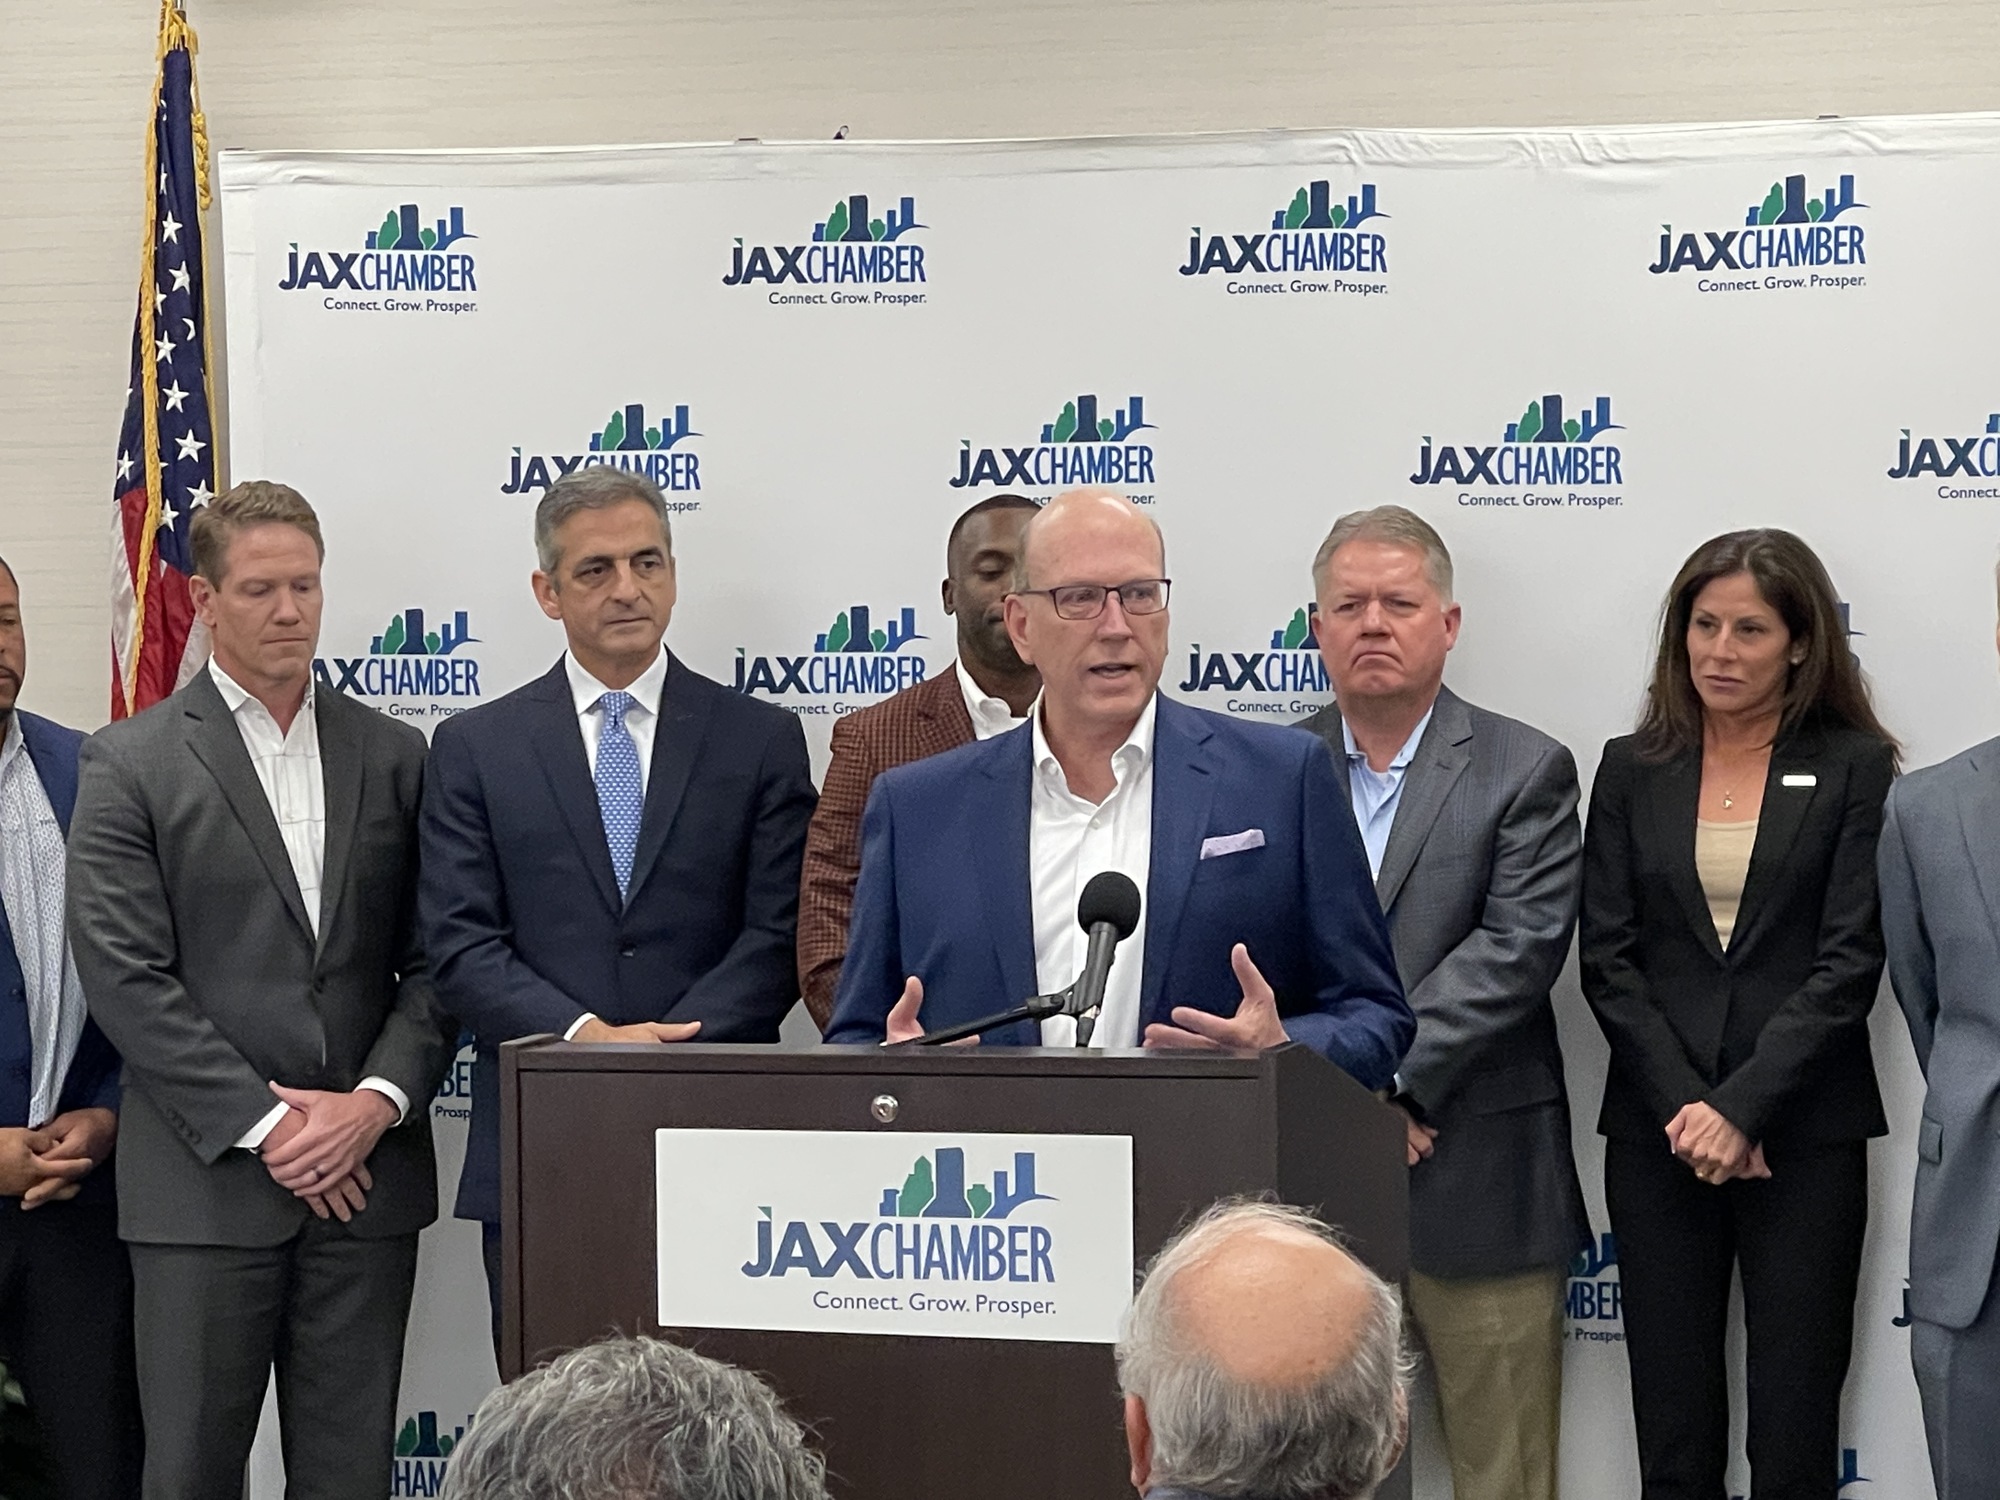 Paysafe CEO Bruce Lowthers speaks at the announcement Nov. 13. Lowthers spent 15 years at the Jacksonville-based FIS before joining Paysafe in May.